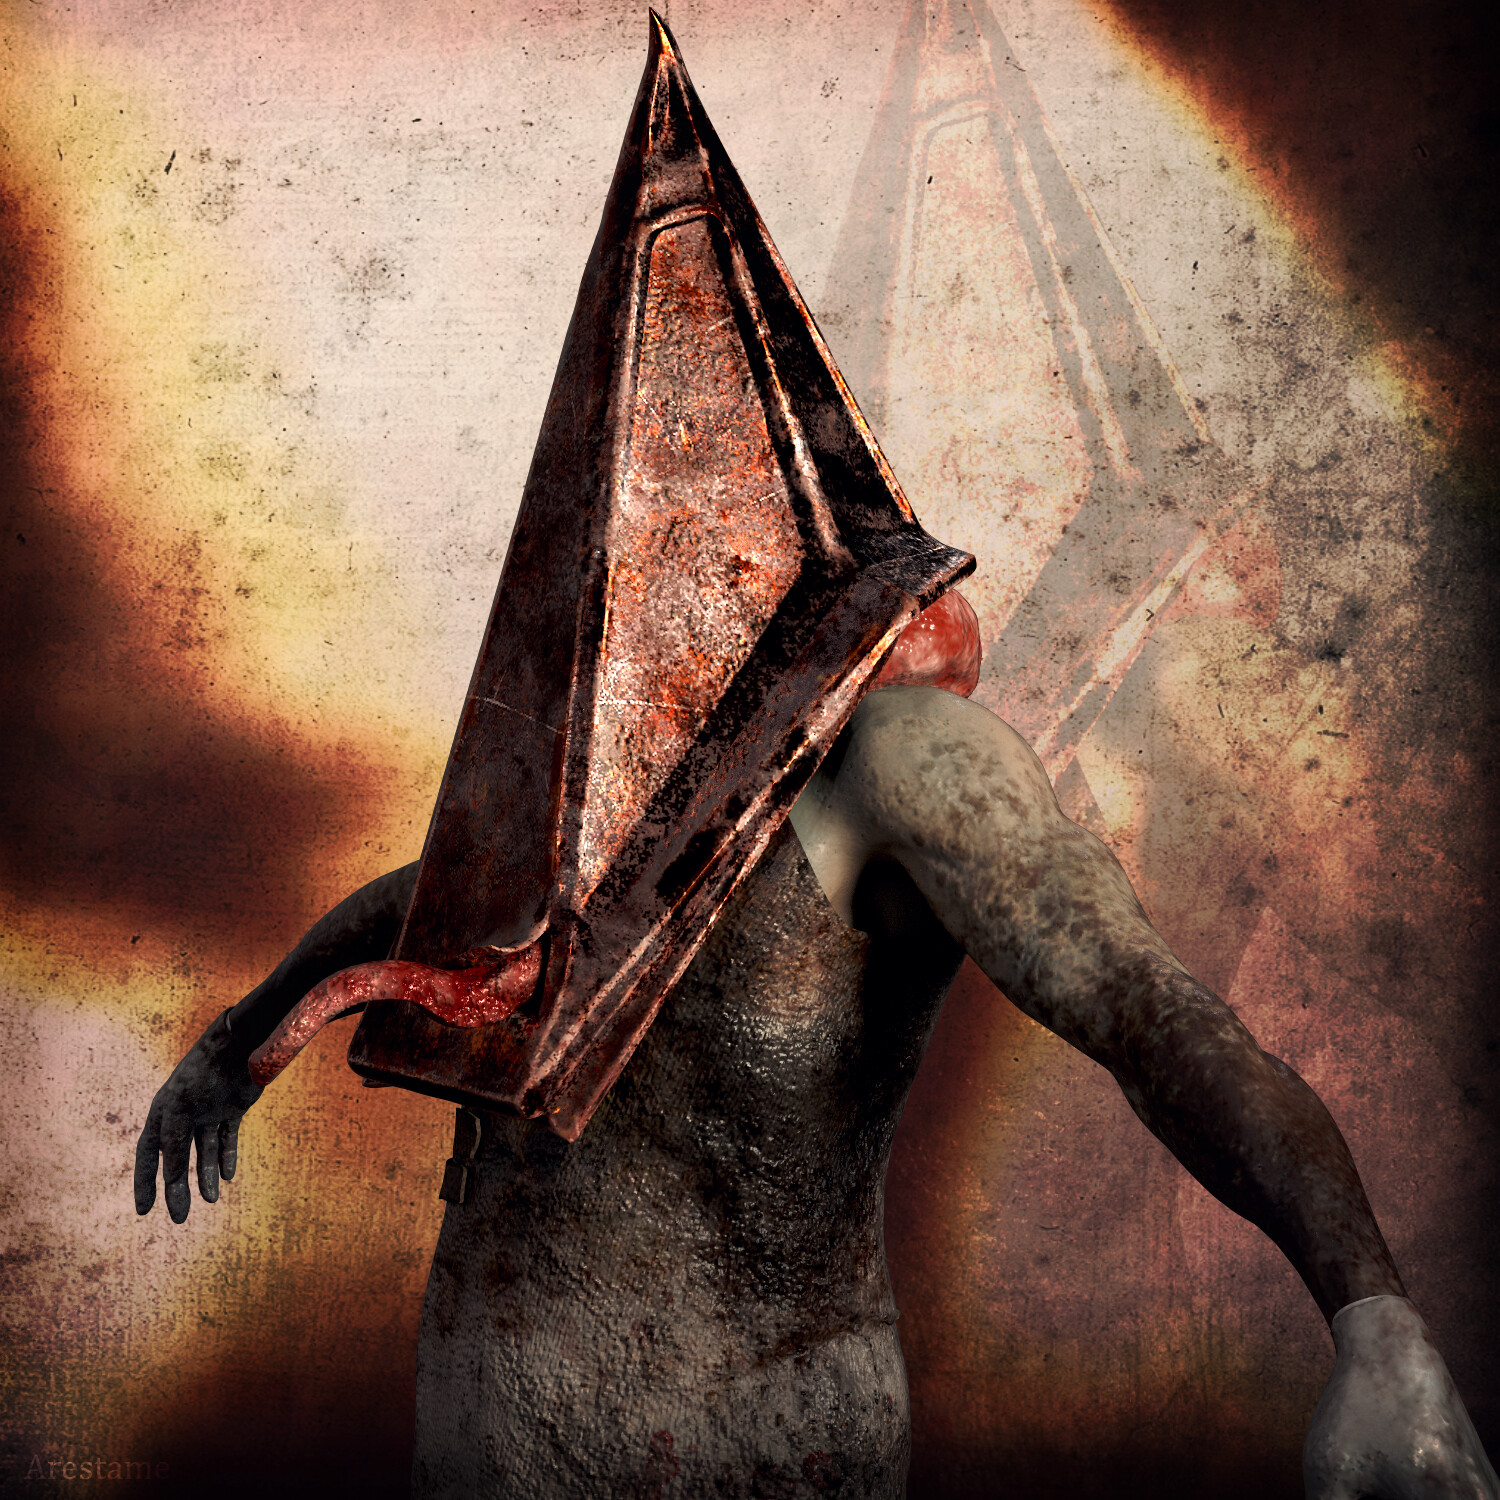 Pyramid Head Anatomy – What's His Real Face Looks Like? What Does